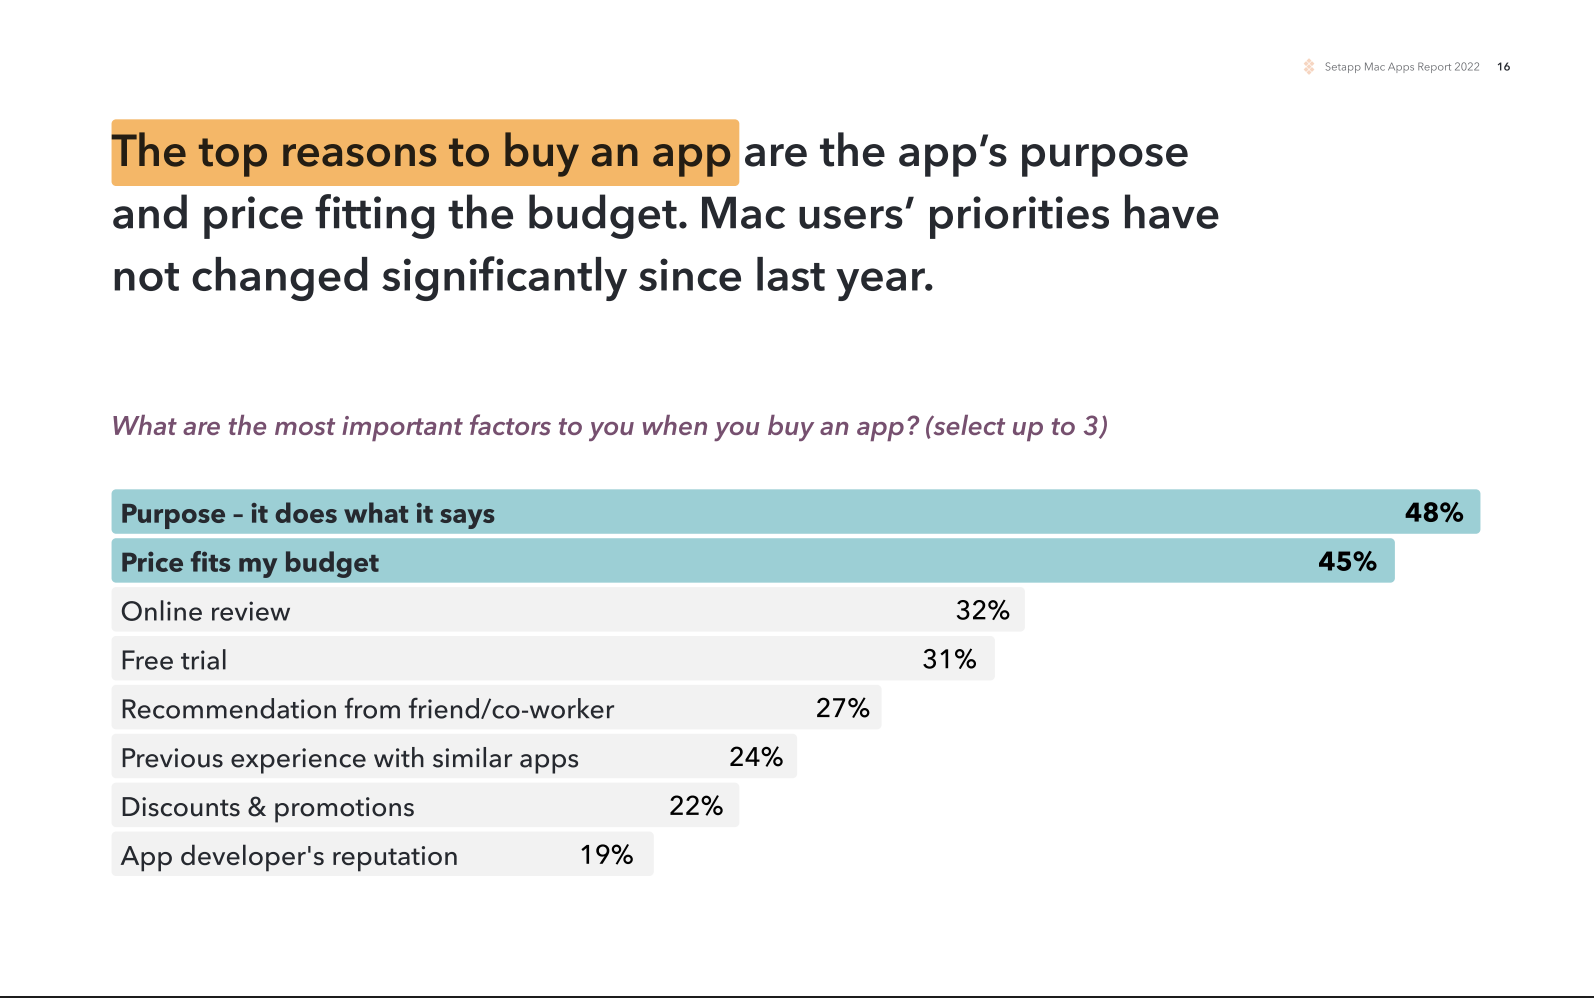 What are the most important factors to you when you buy an app?